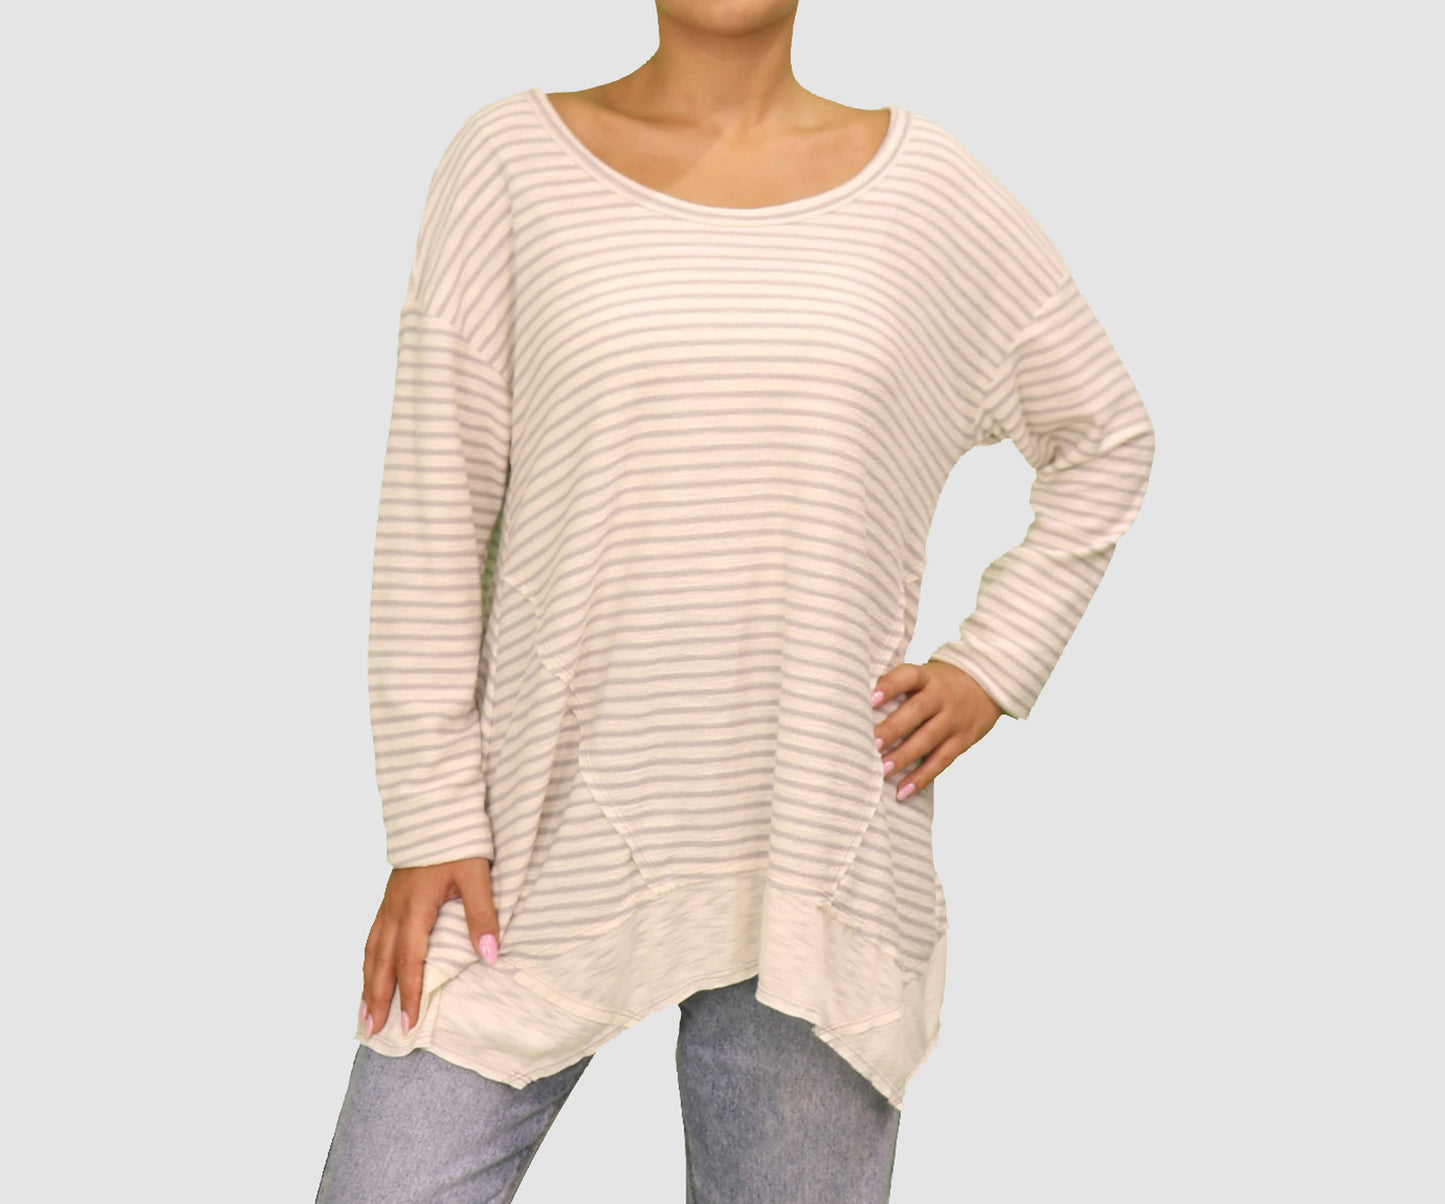 Style & Co Womens Tops Small / White / Grey Long Sleeve Top